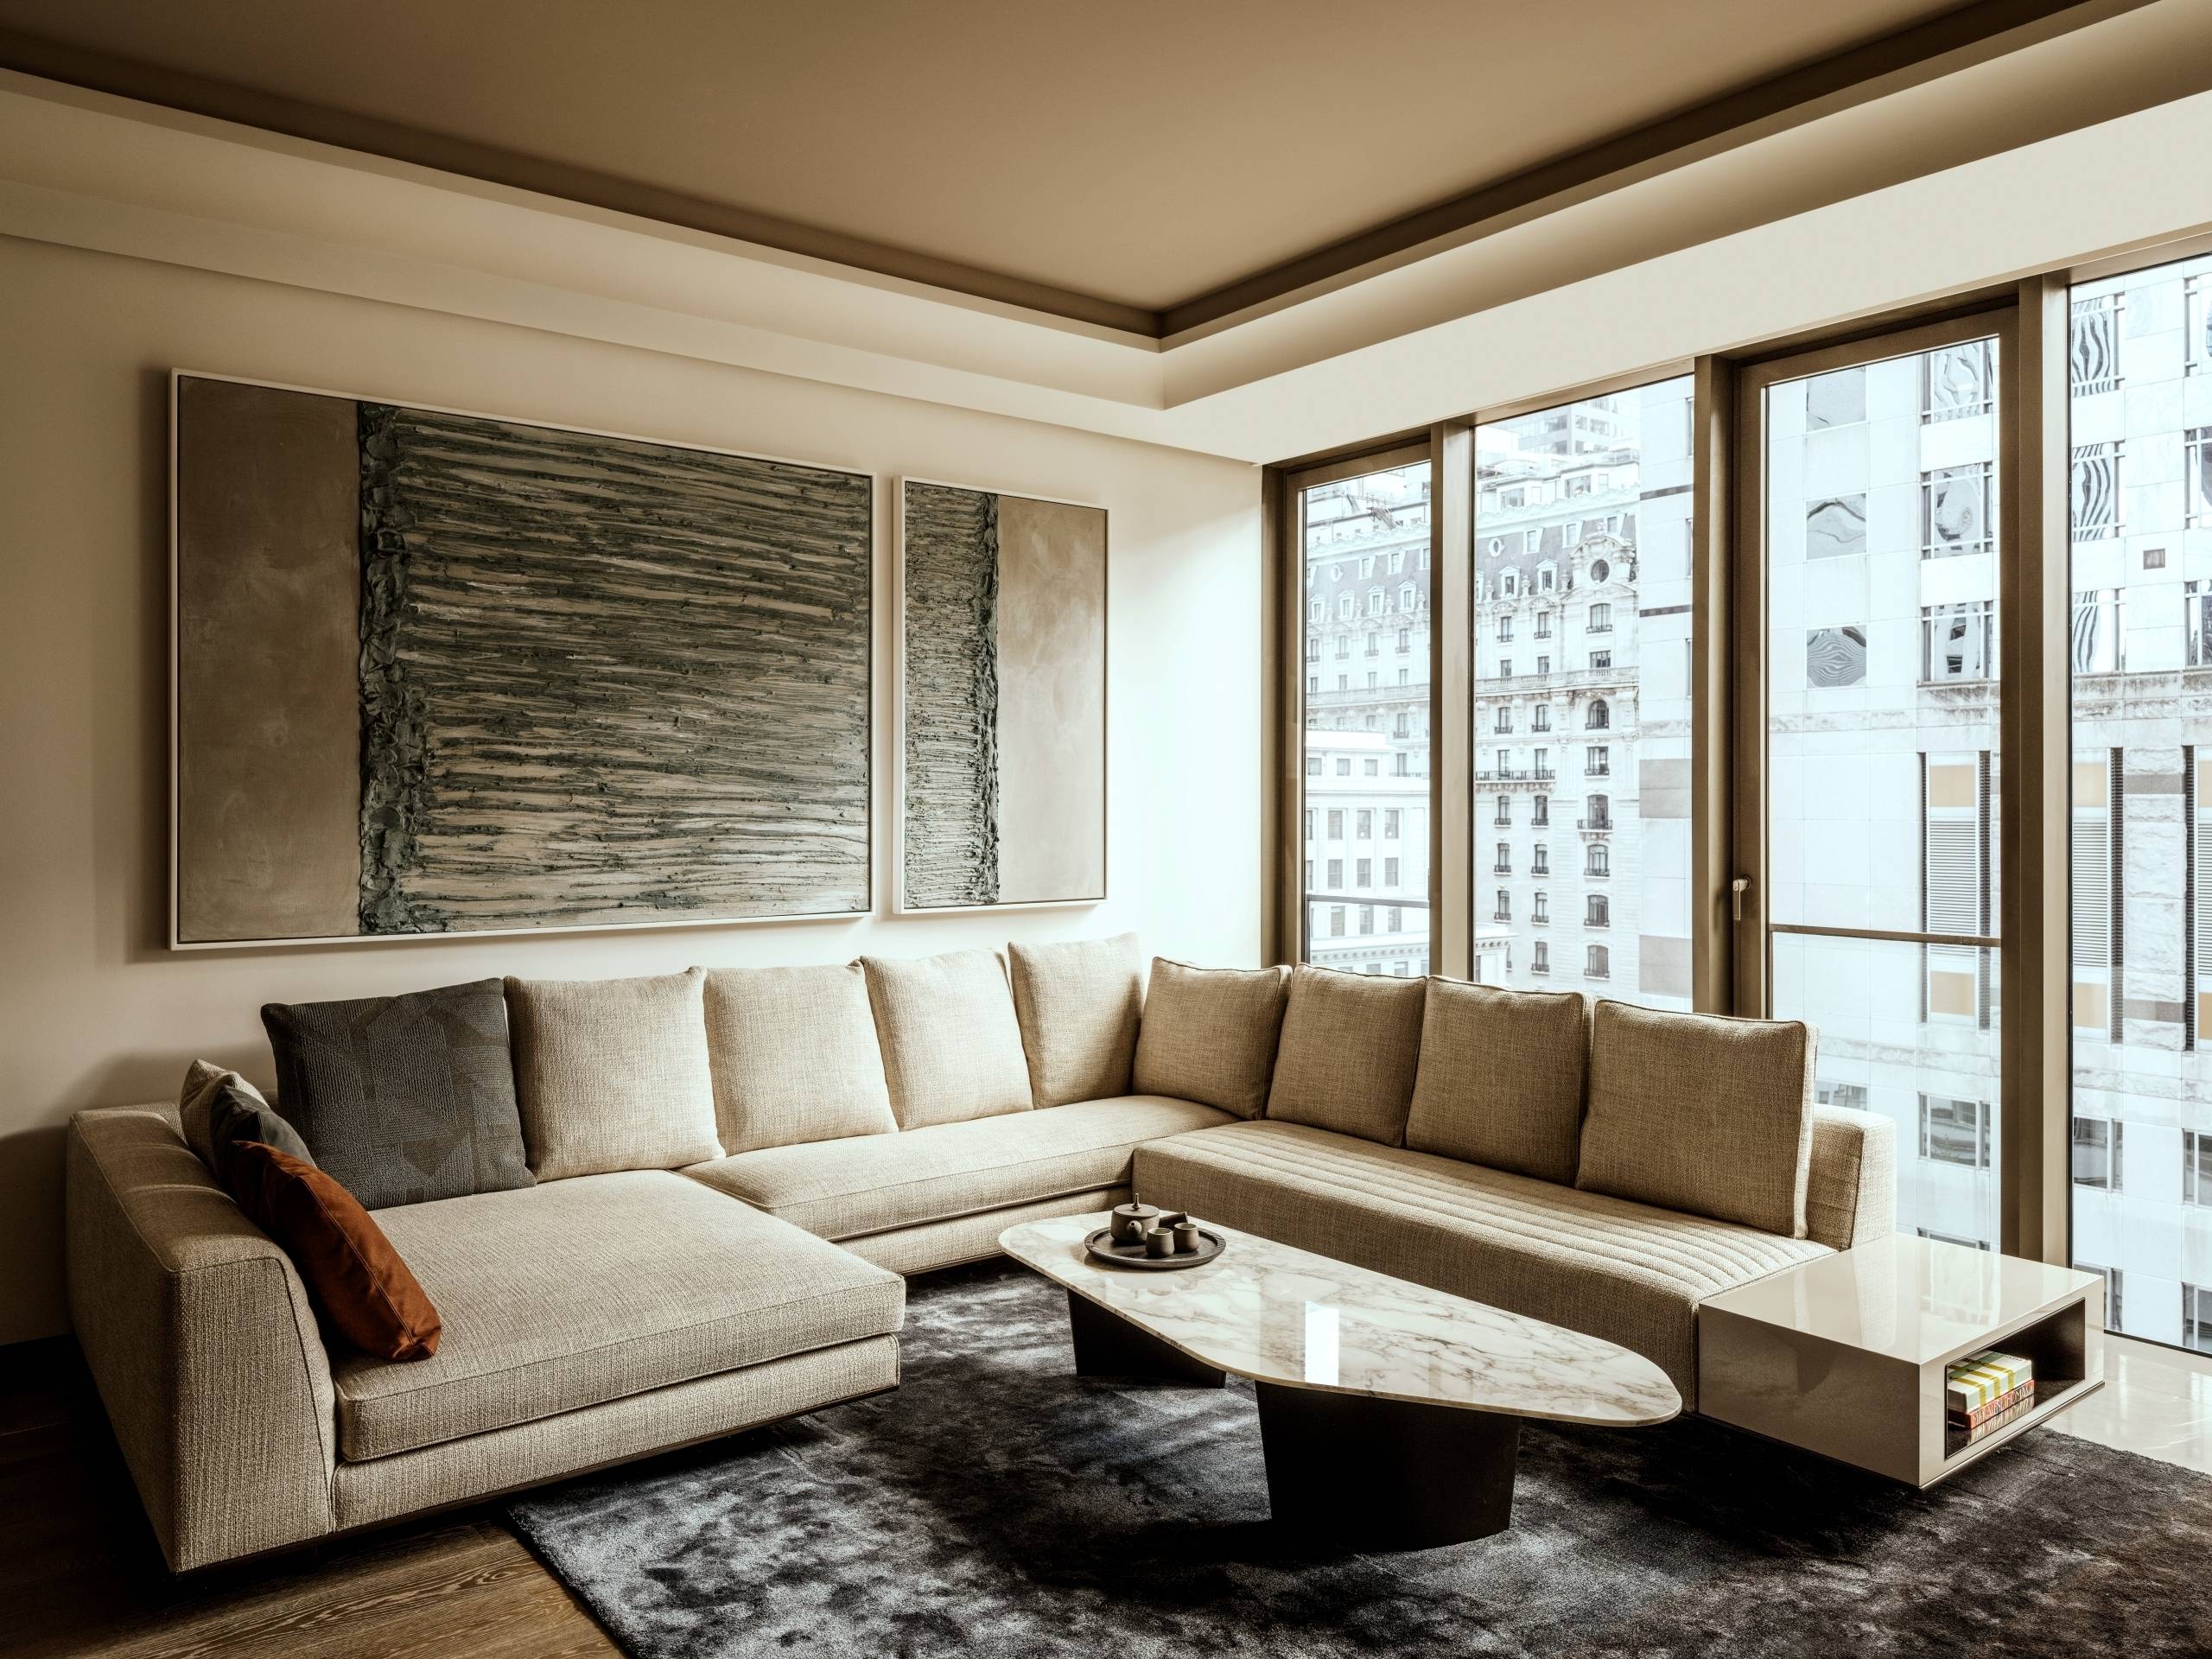 Situated on the 18th floor of Aman New York, this one bedroom branded and fully serviced residence offers expansive views through floor to ceiling windows overlooking 56th Street.